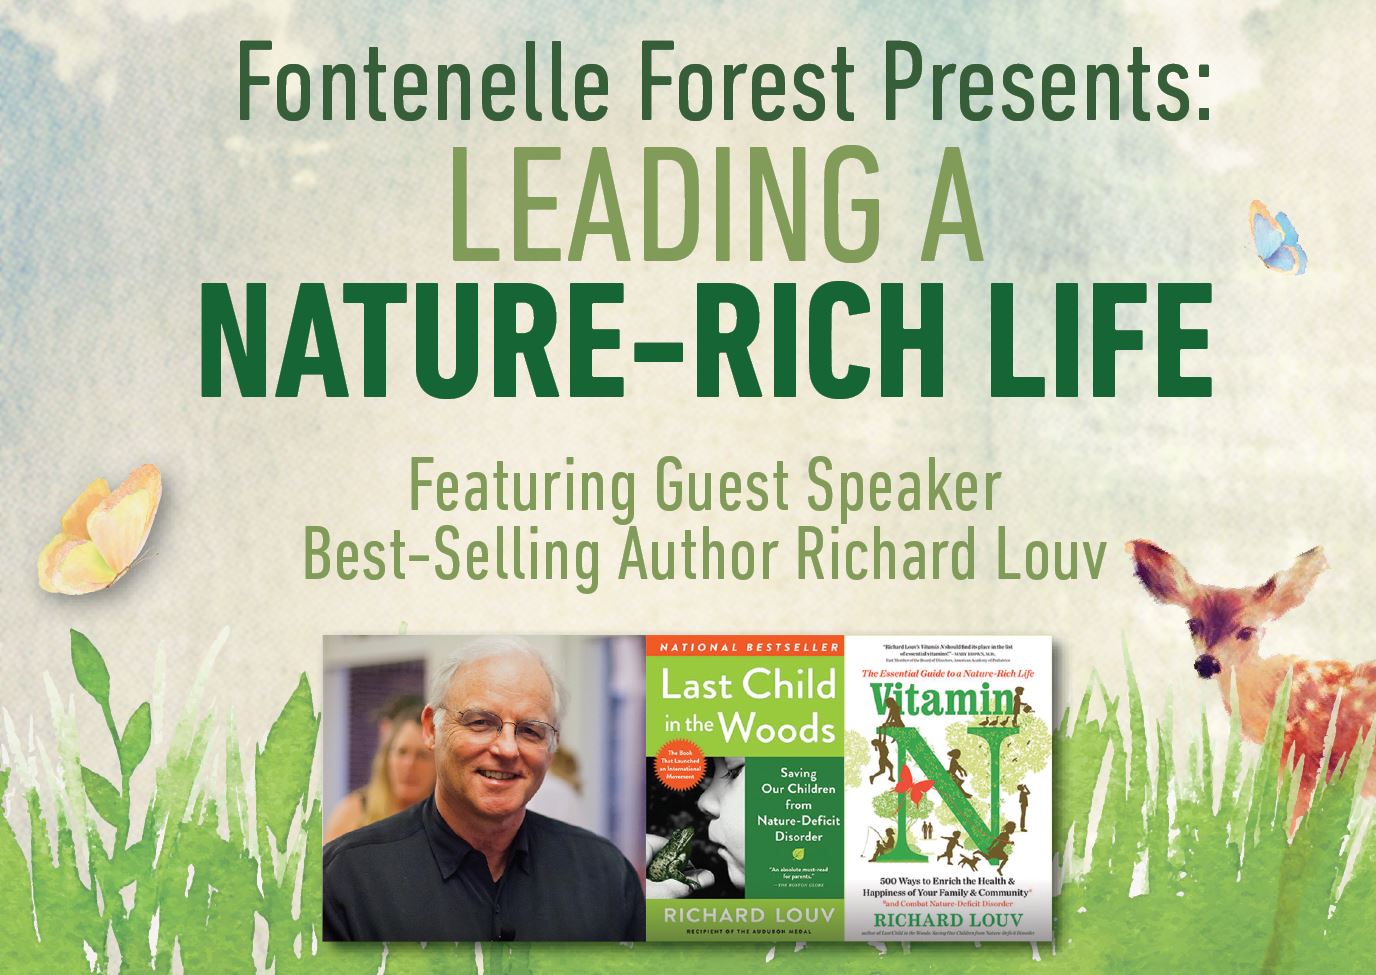 Fontenelle Forest Presents Leading a Nature-Rich Life graphic